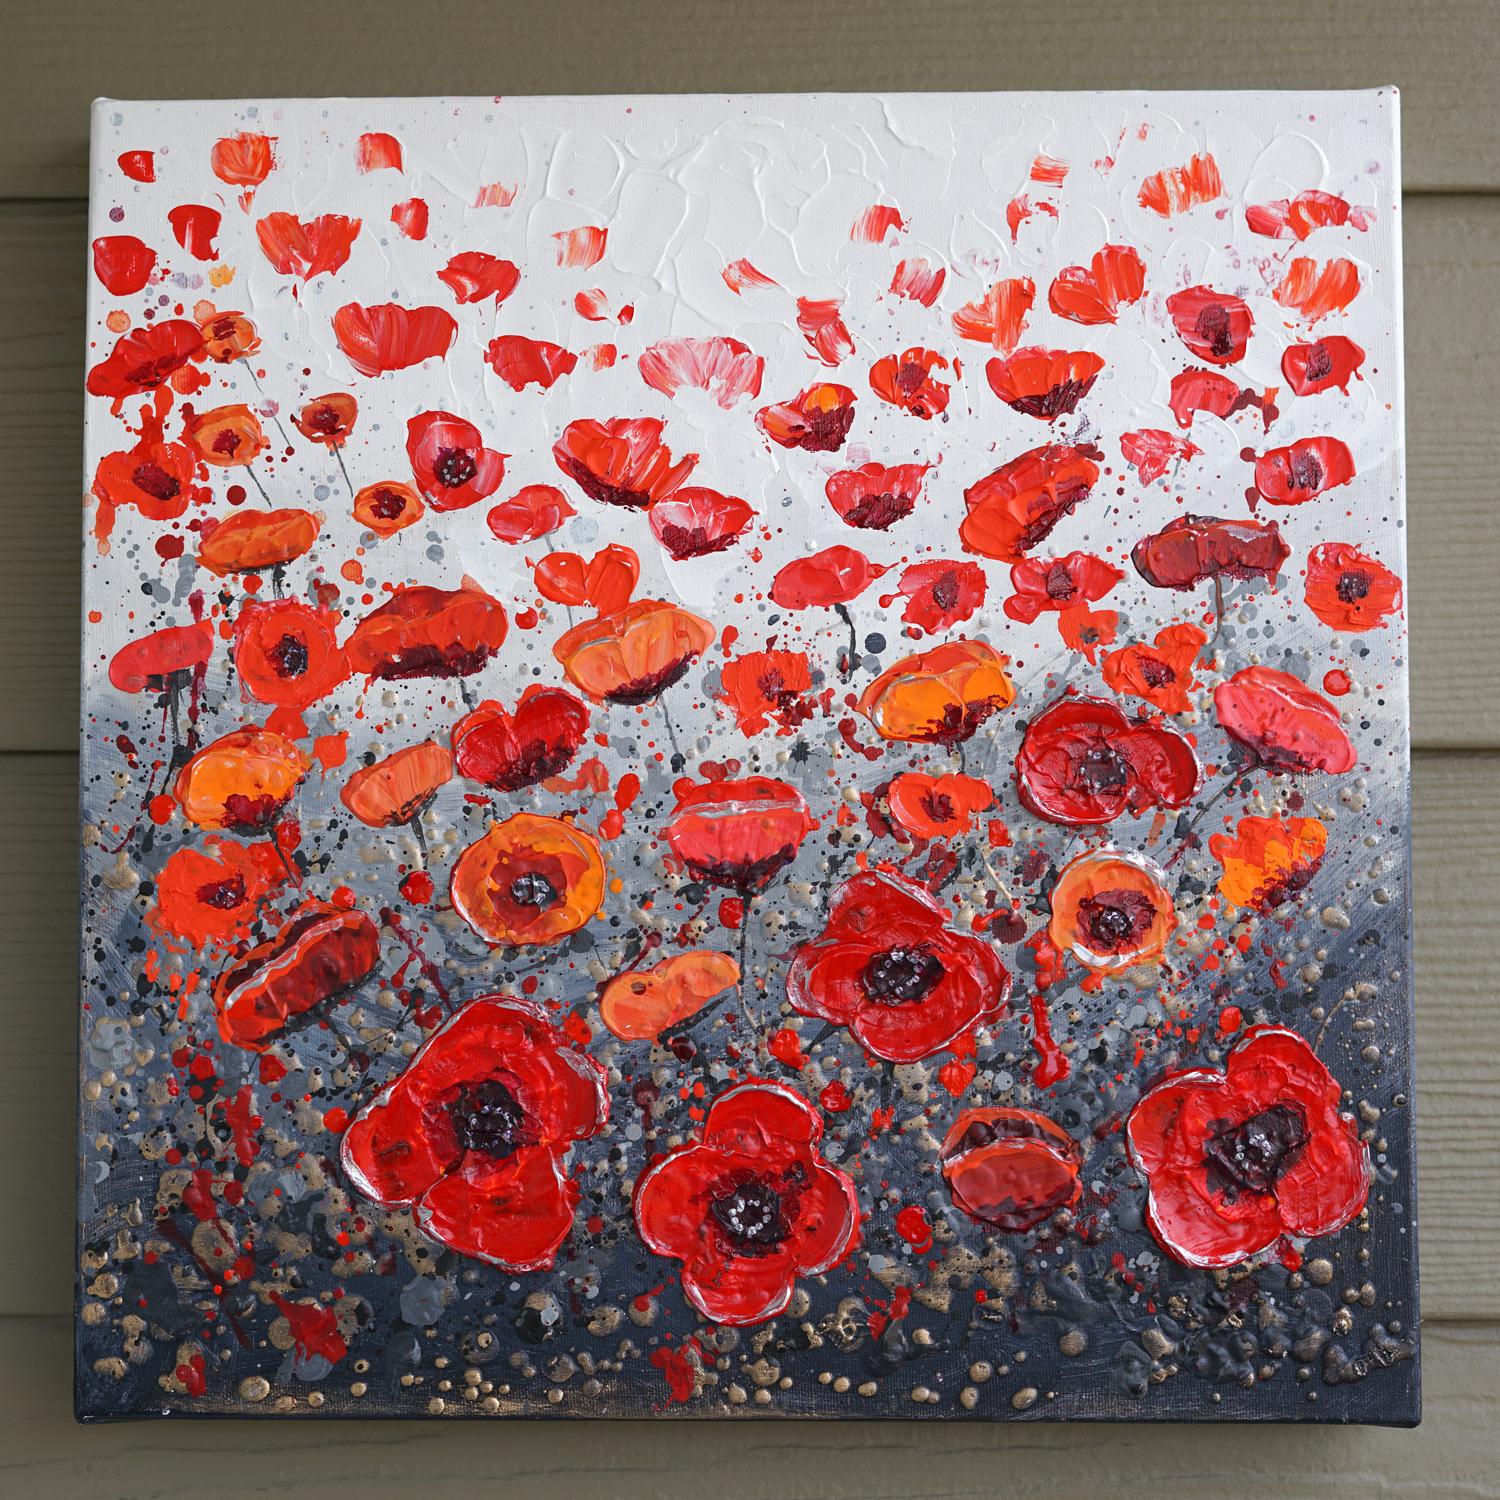 <p>Artist Comments<br>Artist Amanda Dagg paints poppies rising to the light in an explosion of reds and oranges. She paints the textured blooms ascending to the sky like wishes on a winter landscape. 